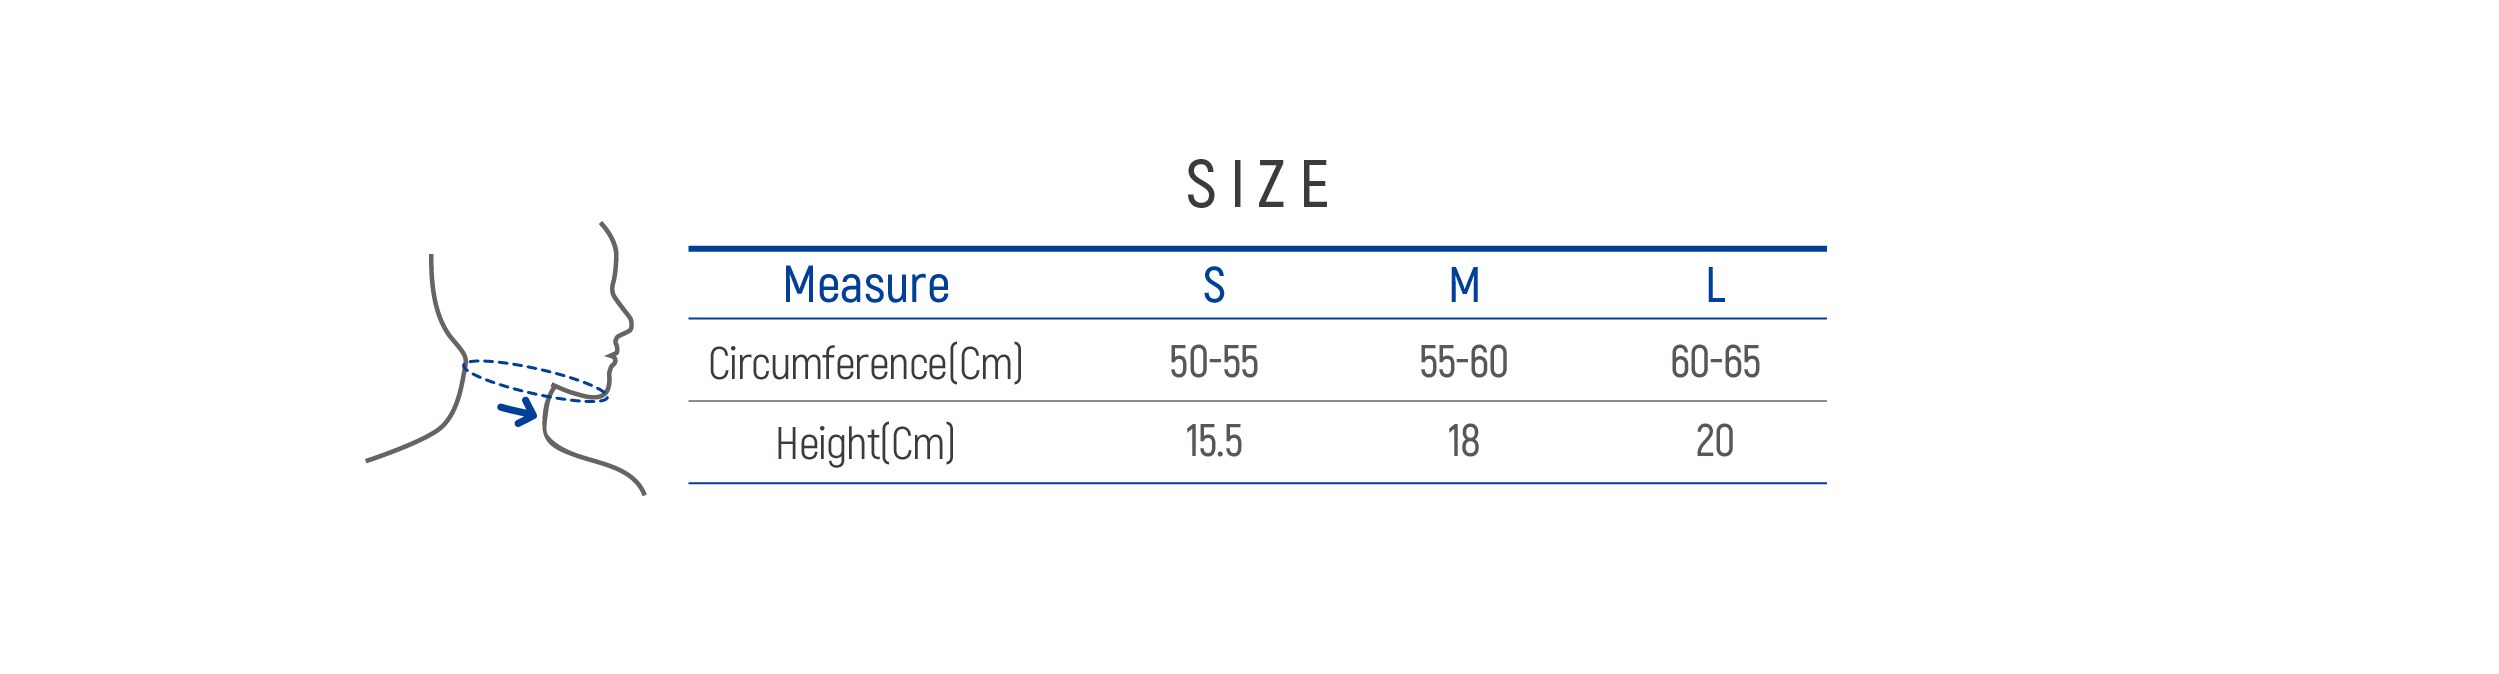 DR-123-1 Size table image